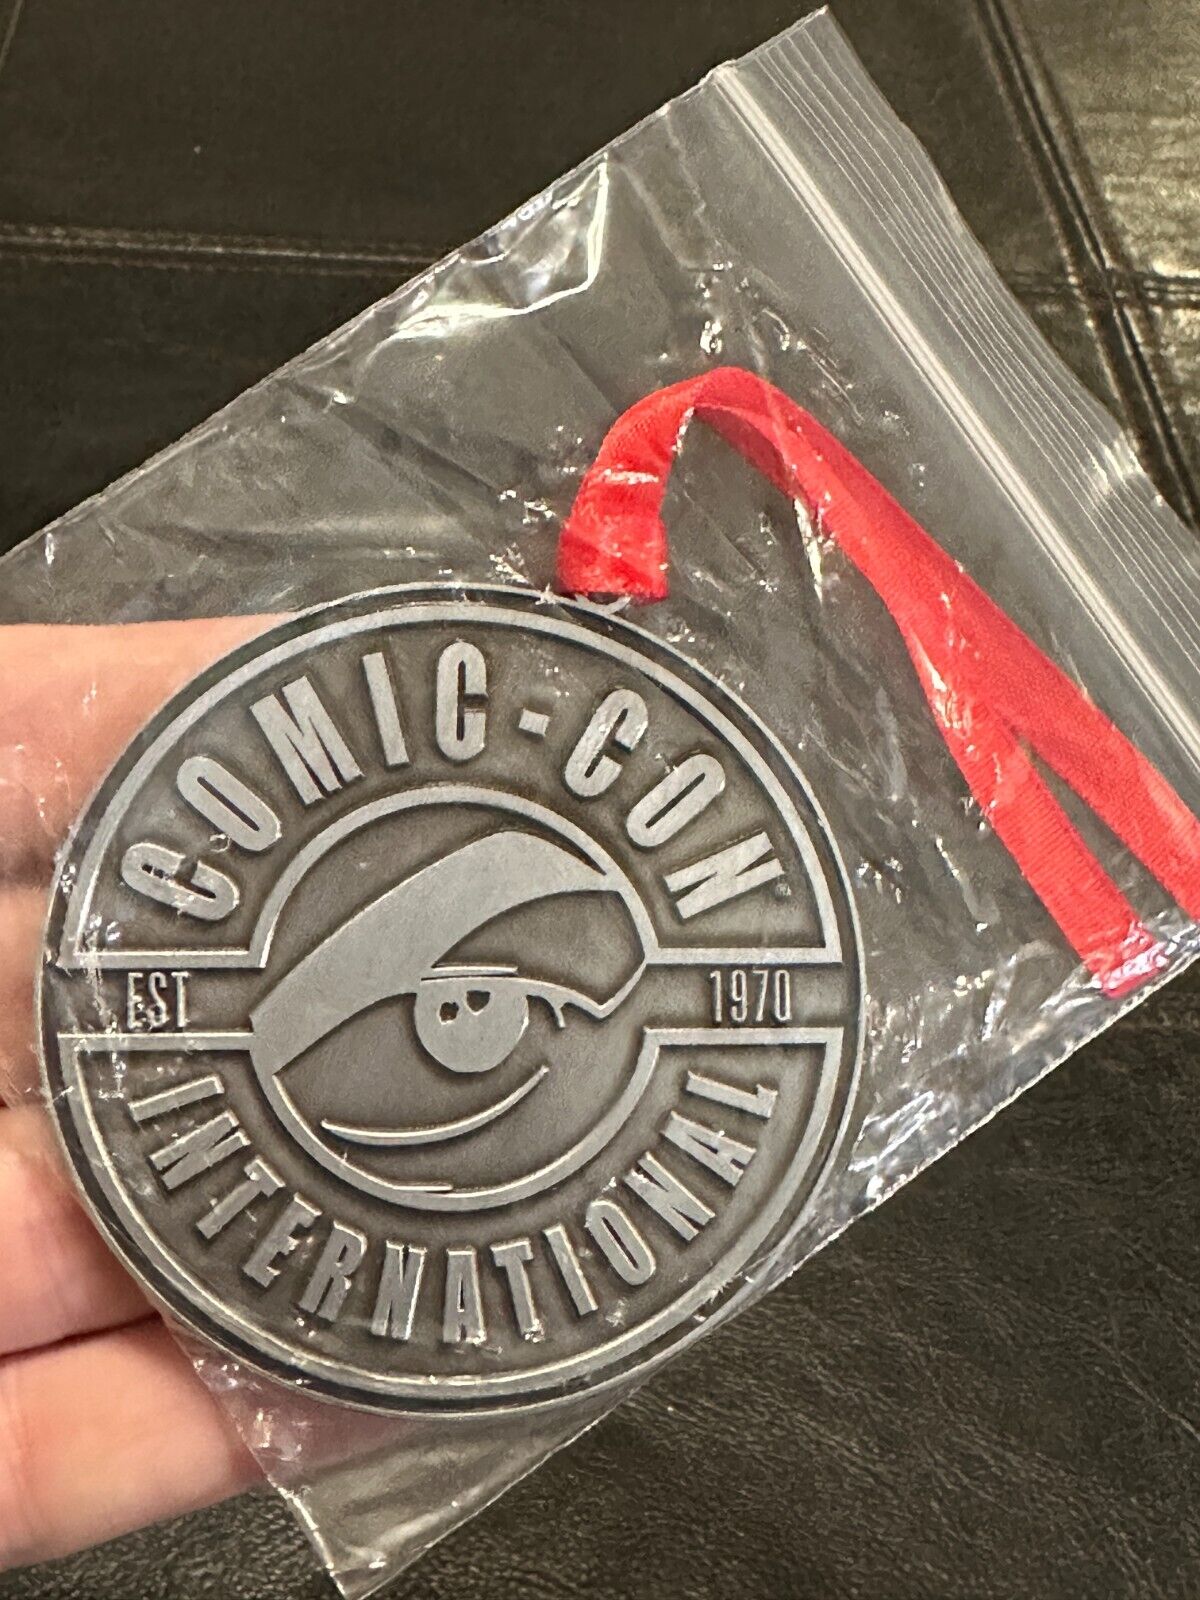 SDCC 2020 Ornament Limited Production of 500 San Diego Comic Con Medal